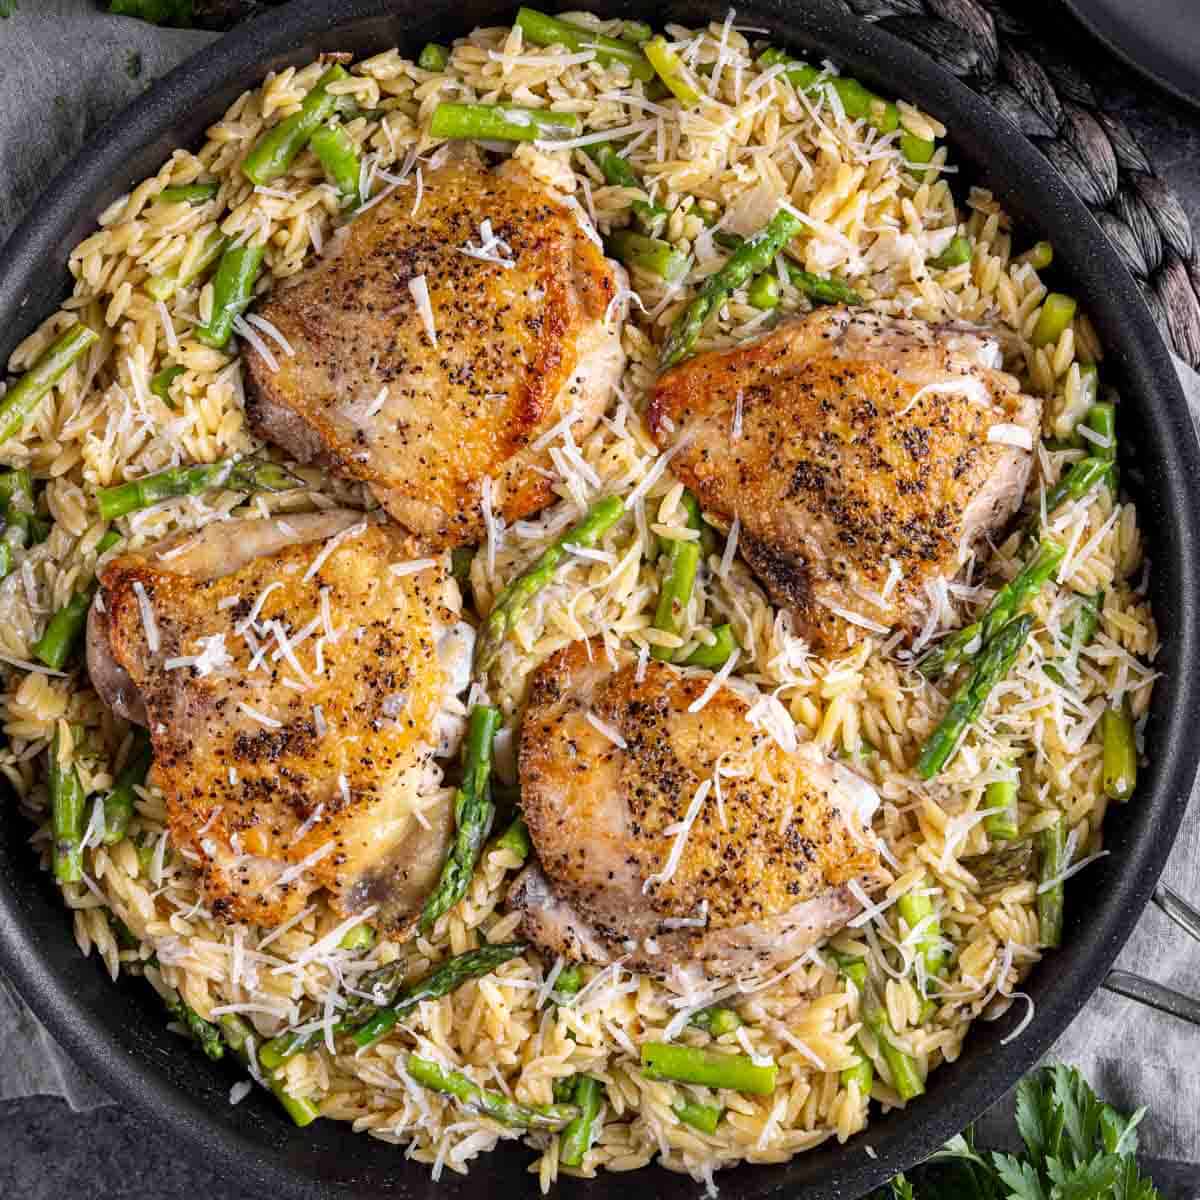 Parmesan Chicken Orzo served over a bed of rice and asparagus, garnished with grated cheese.